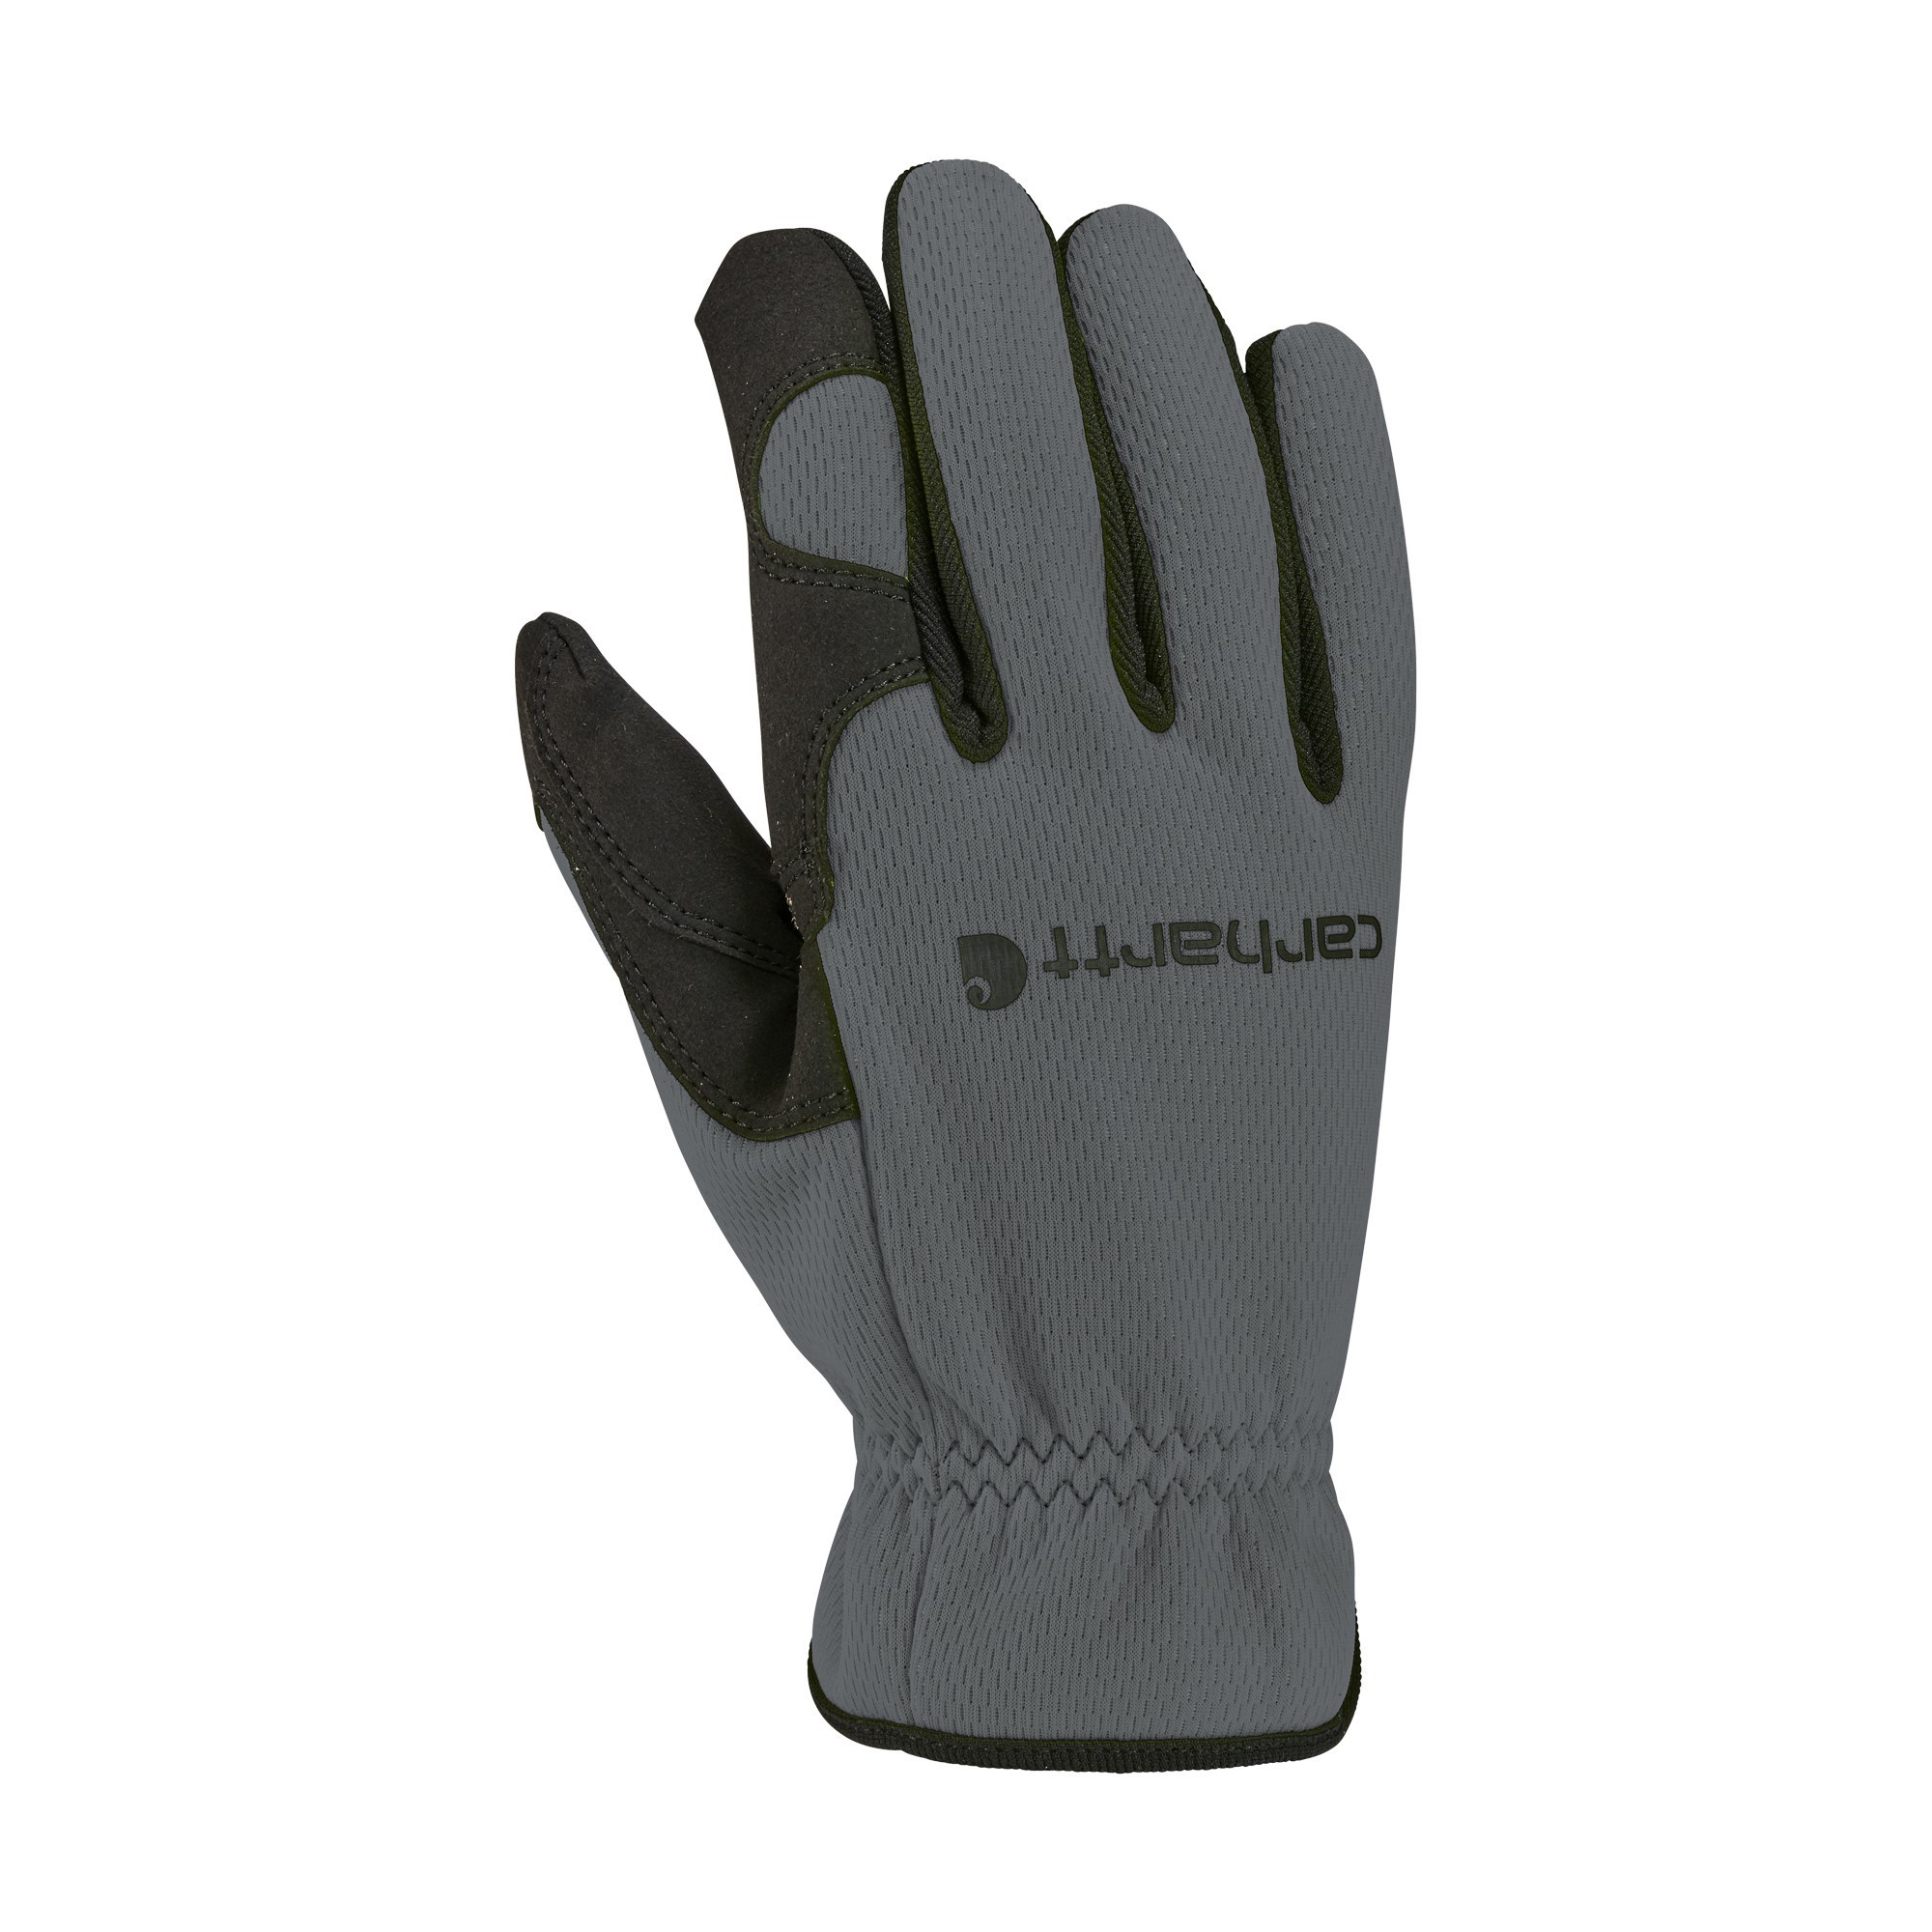 Carhartt Gloves, Thermal Lined High Dexterity Open Cuff Glove, Size L, Color Gray, Included (qty.) 1 Model GD0806M